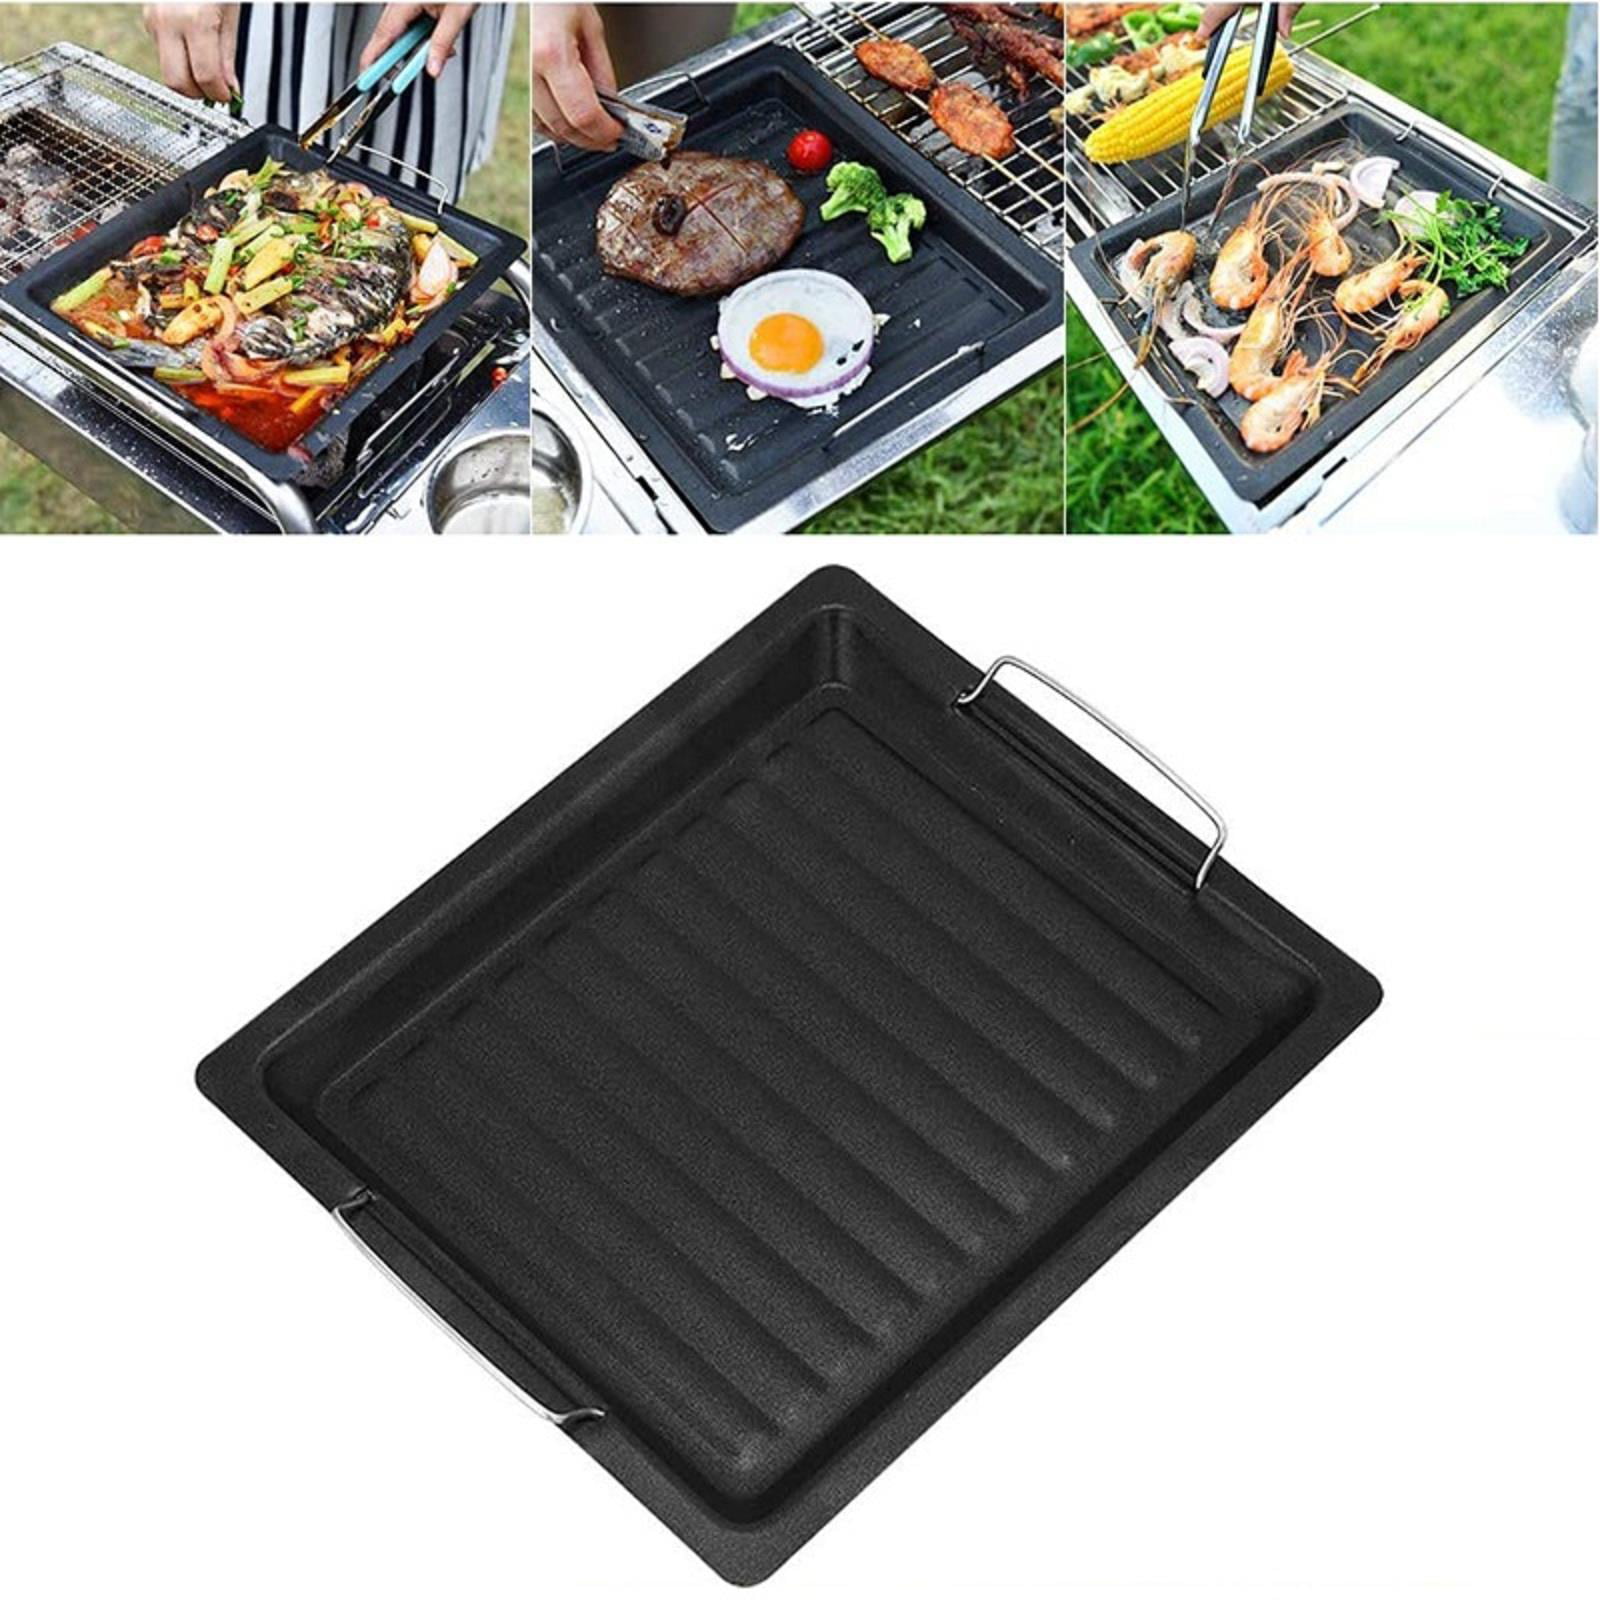  Cabilock Grilling Tray Non Stick Grill pan Small Grill pan  Square Griddle Korean Grill pan Food Tray stovetop Grill pan BBQ pan Pizza  Baking pan Grill Meat pan South Korea Portable 